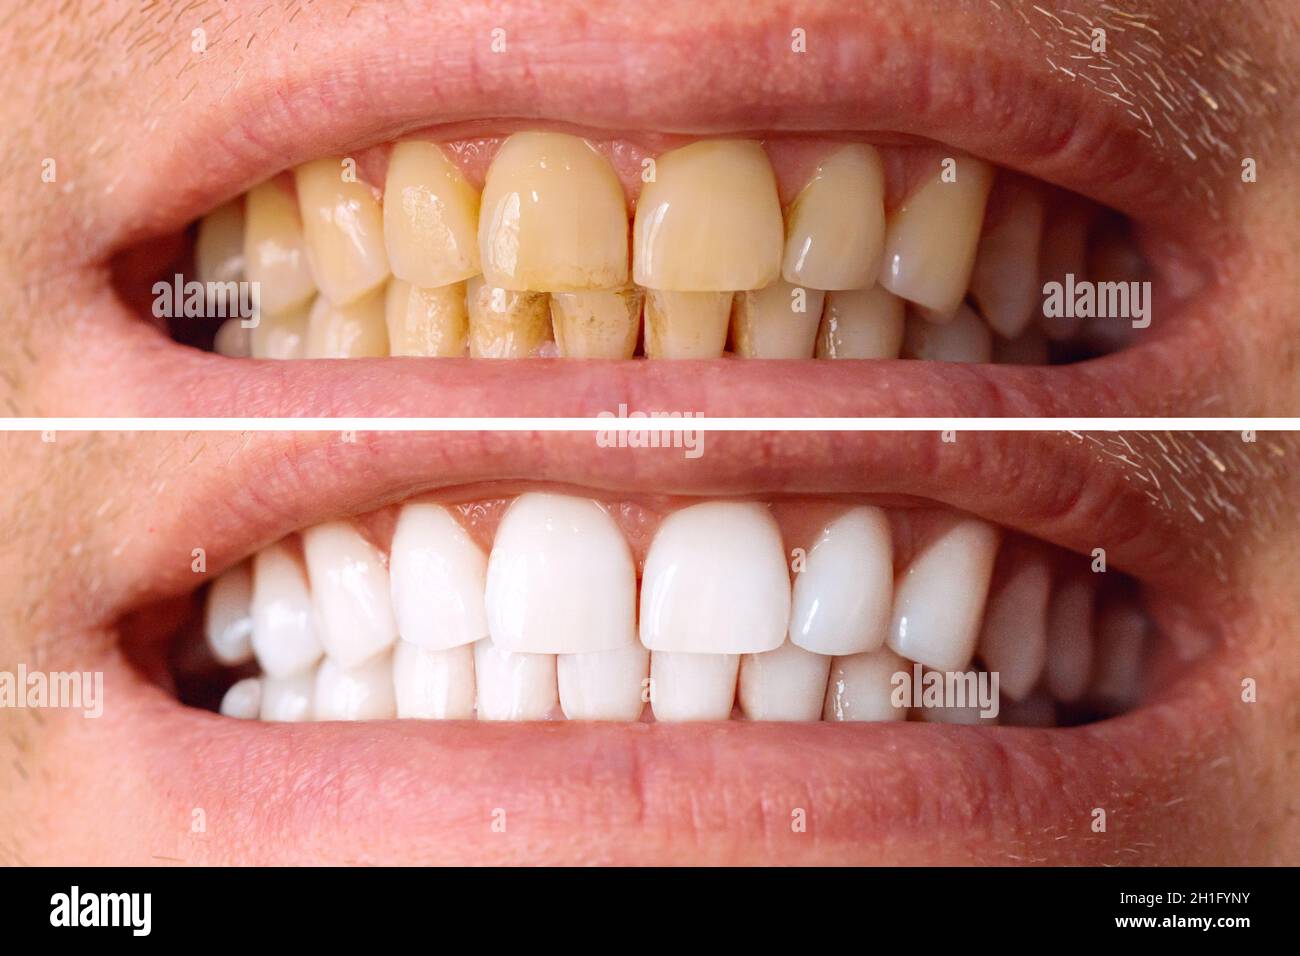 Teeth before and after whitening. Over white background. Dental clinic patient. Image symbolizes oral care dentistry, stomatology Stock Photo